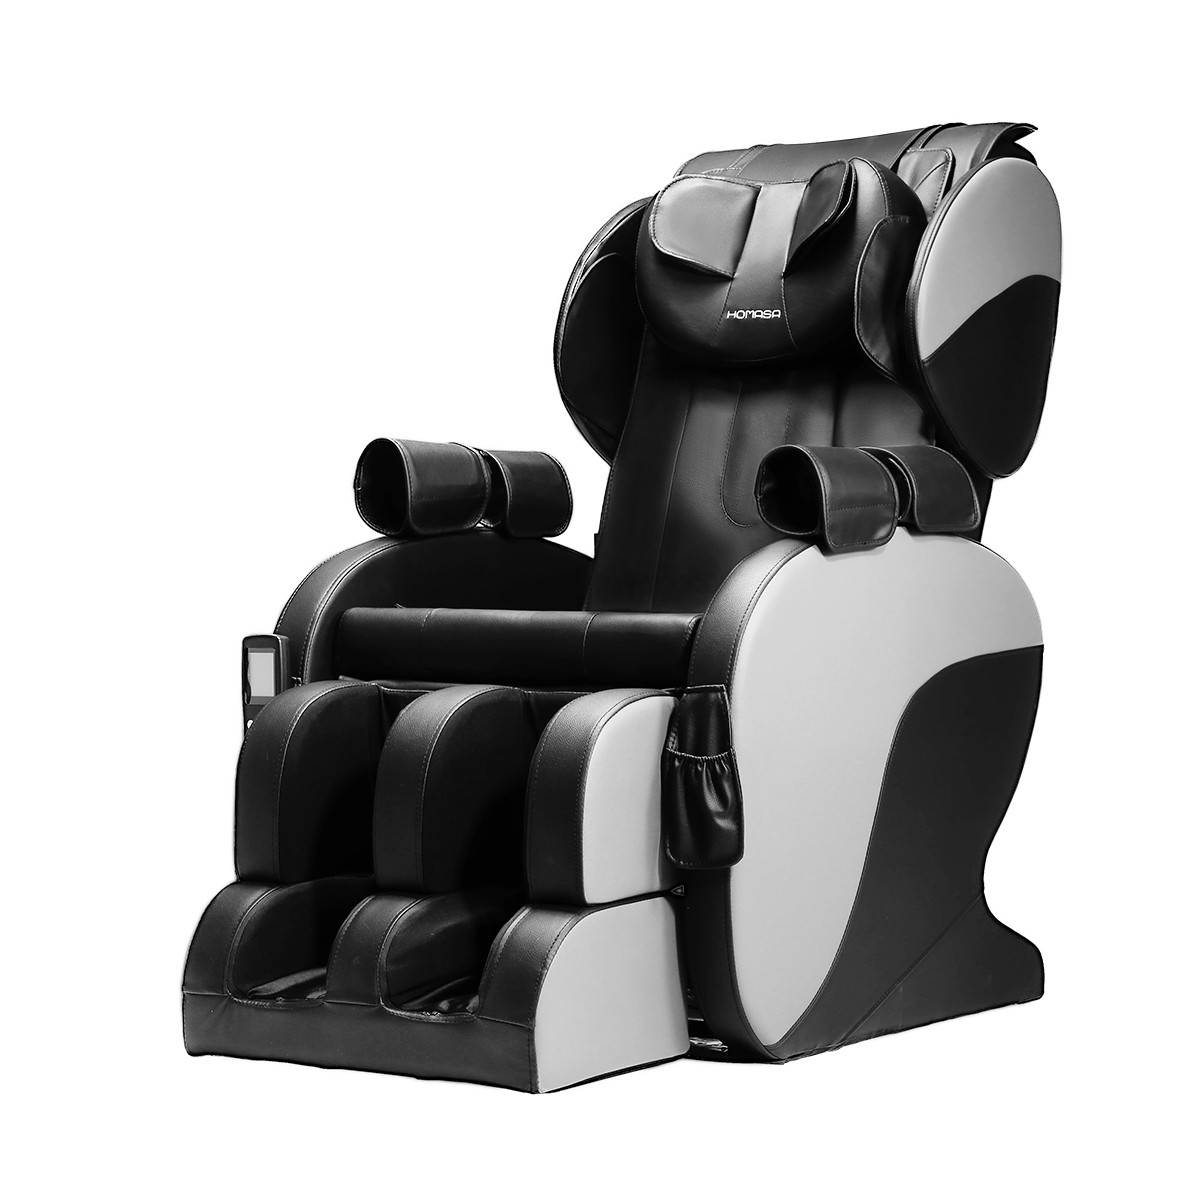 Full Body Massage Chair with Heating